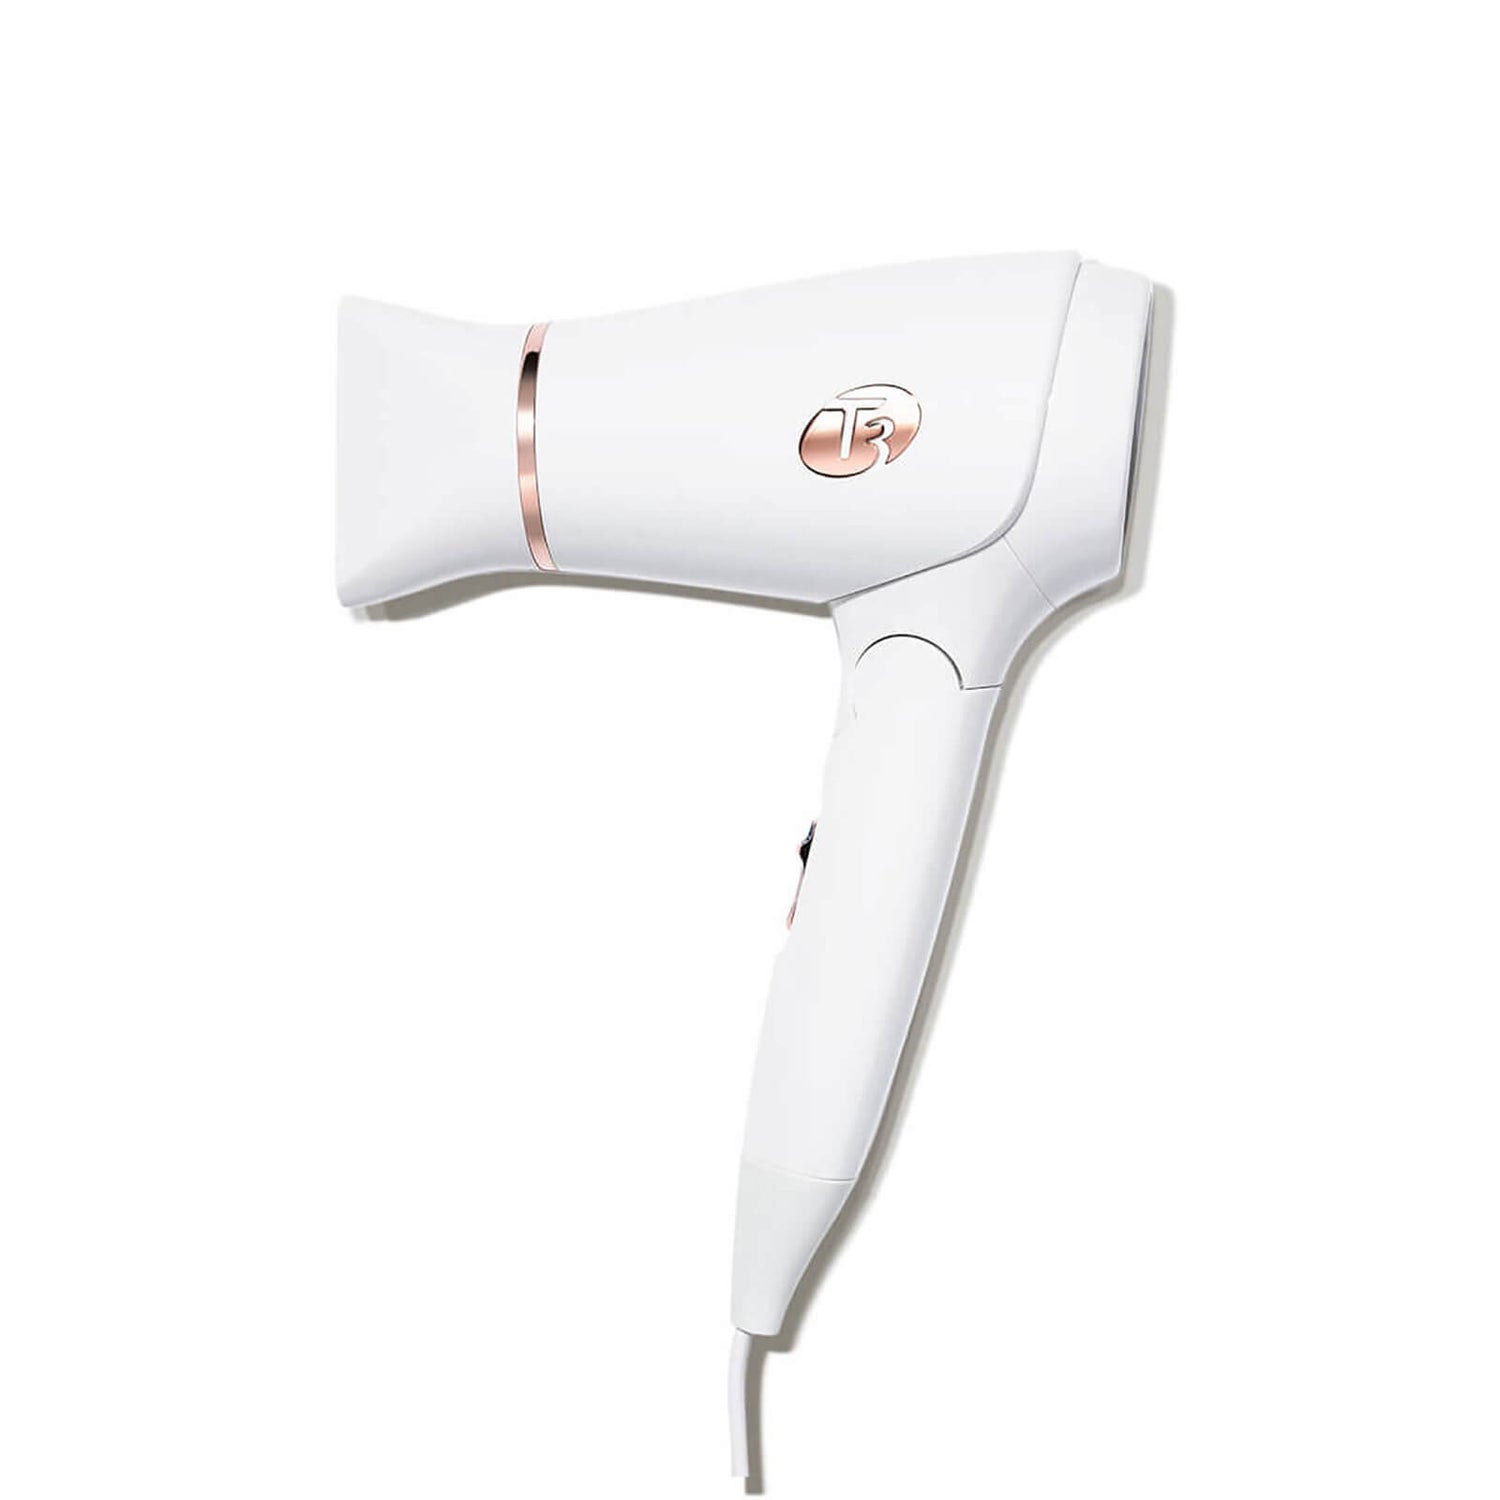 T3 Featherweight Compact Folding Hair Dryer with Dual Voltage - White/Rose Gold (3 piece)